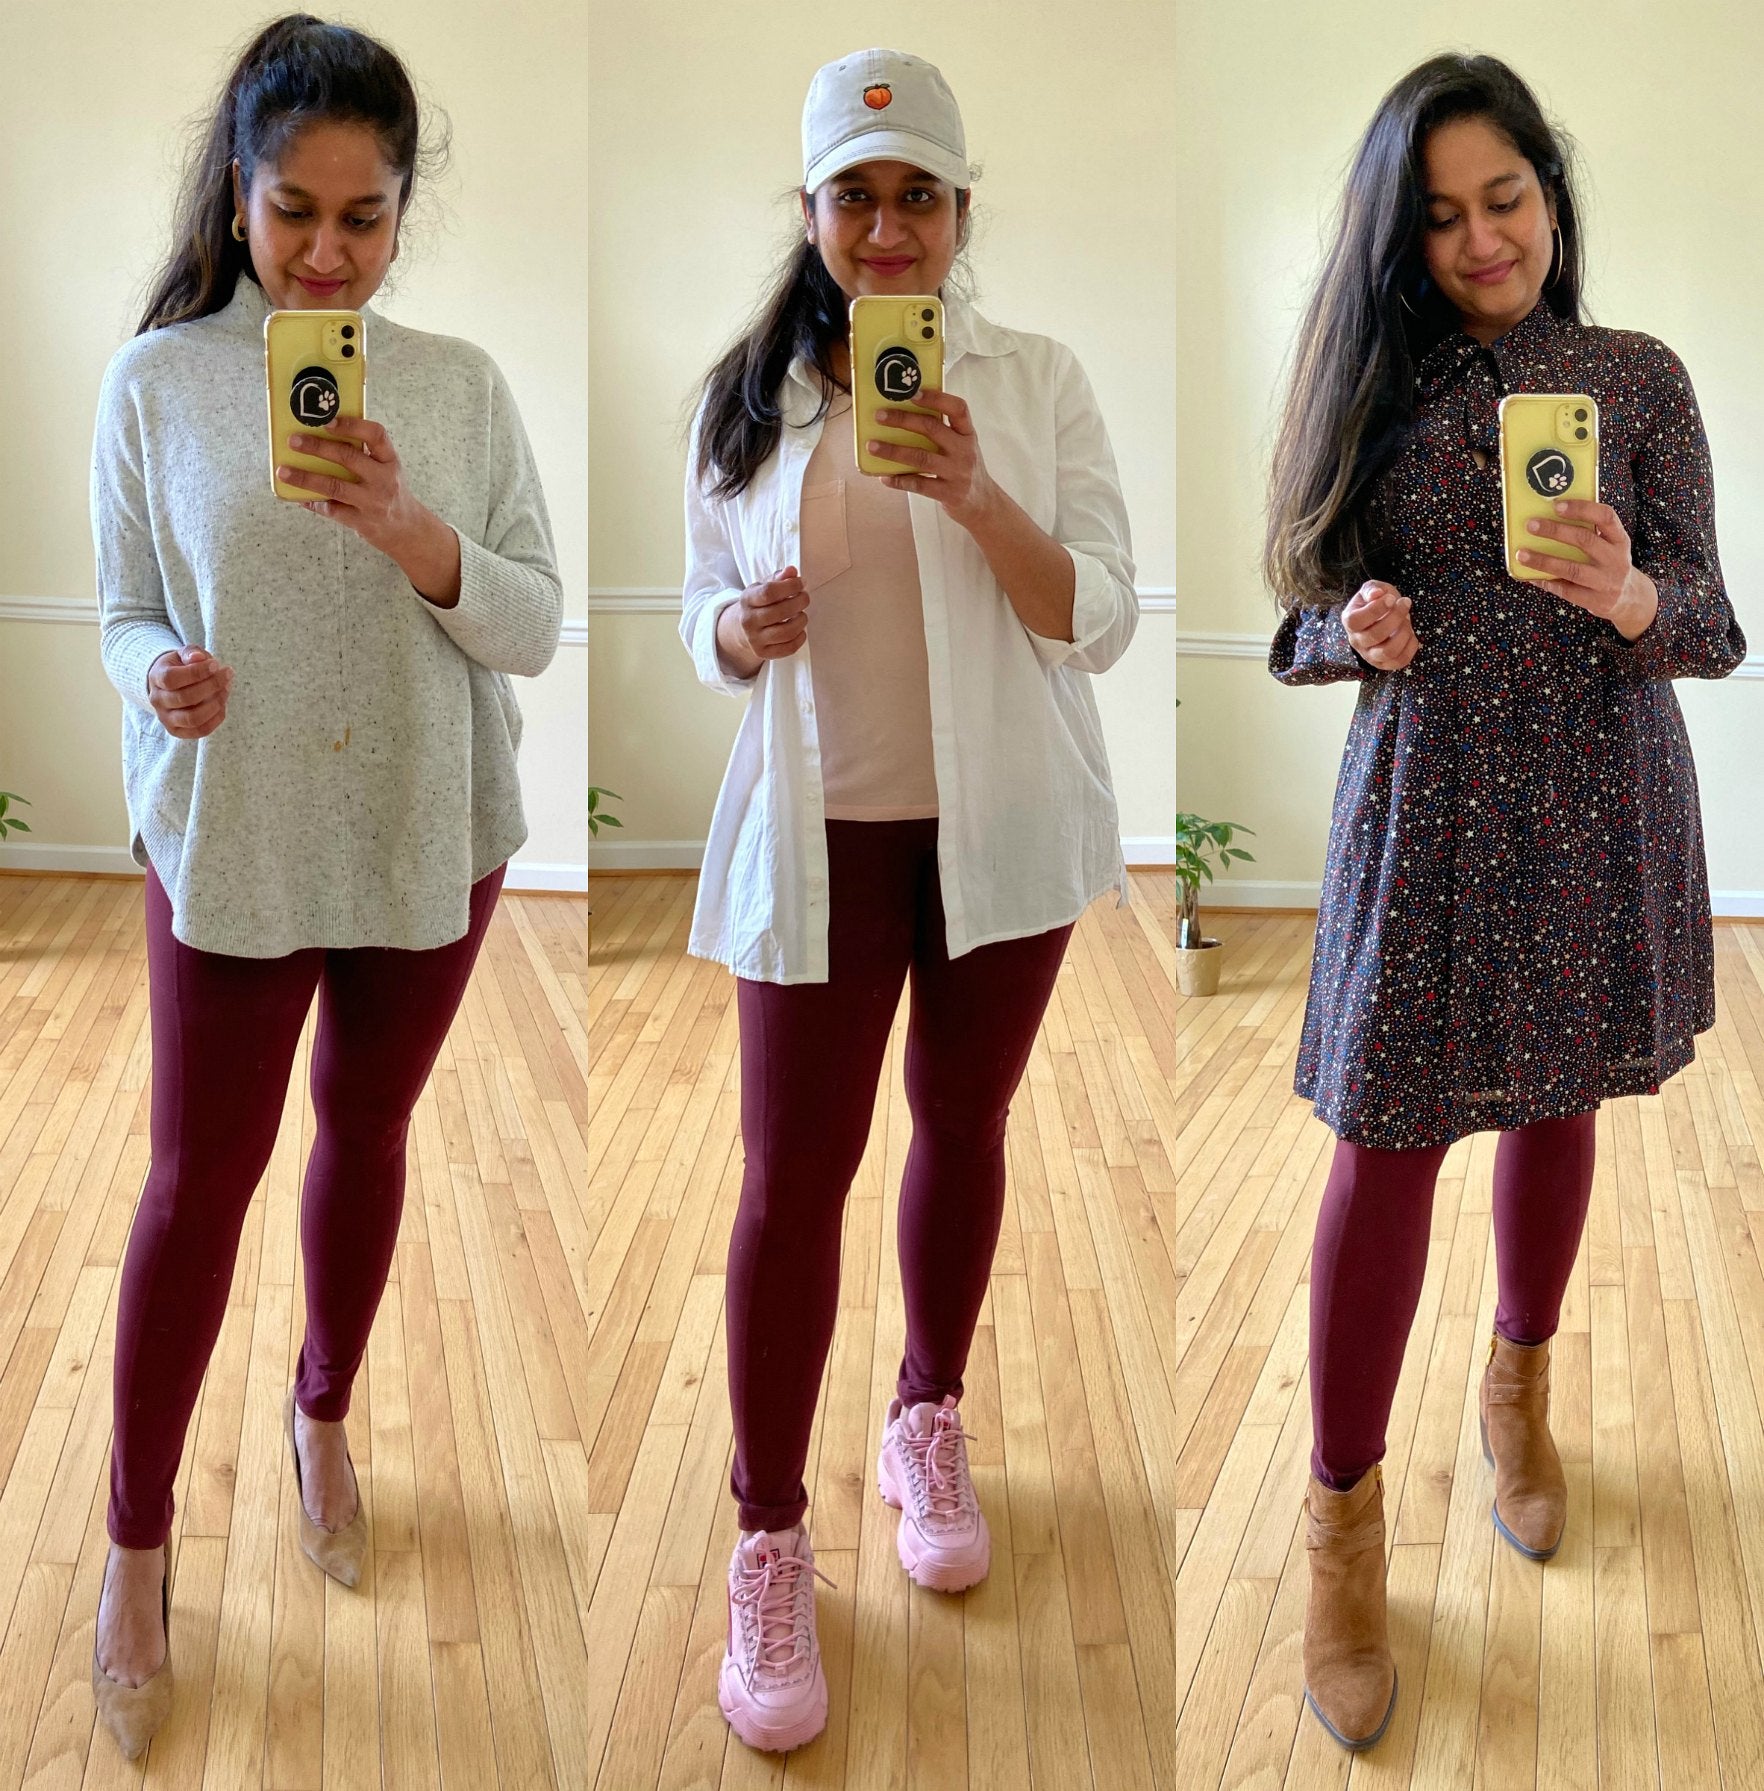 How To Wear A Sweater Dress With Leggings? – solowomen